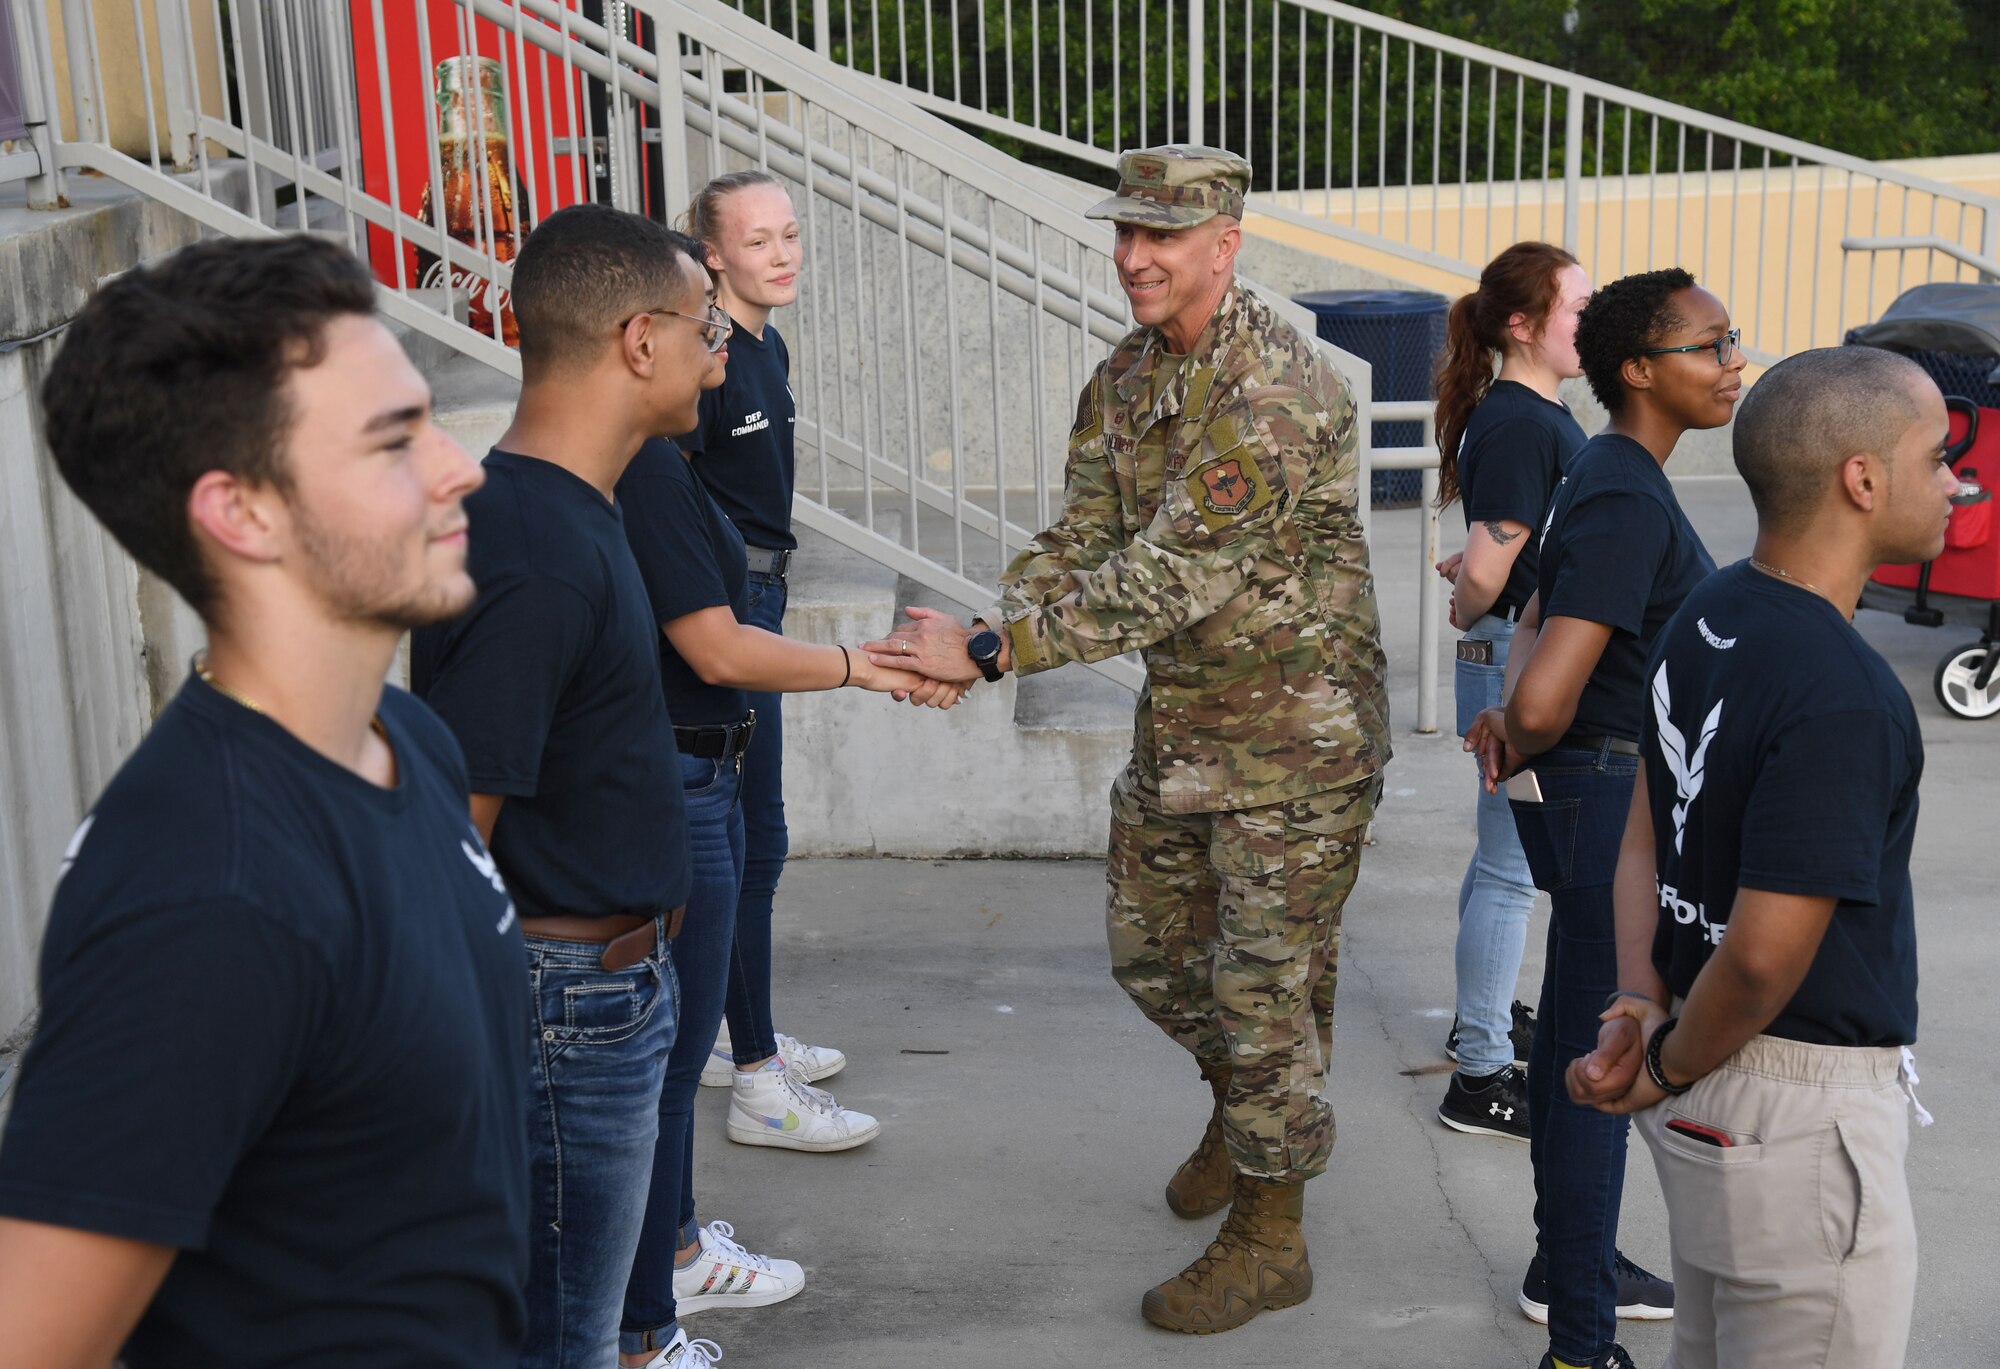 U.S. Air Force Col. William Hunter, 81st Training Wing commander, congratulates 10 Air Force delayed entry program recruits after reciting the oath of office during the Biloxi Shuckers Minor League Baseball game in Biloxi, Mississippi, July 10, 2021. Hunter also threw the first pitch during pre-game festivities. (U.S. Air Force photo by Kemberly Groue)